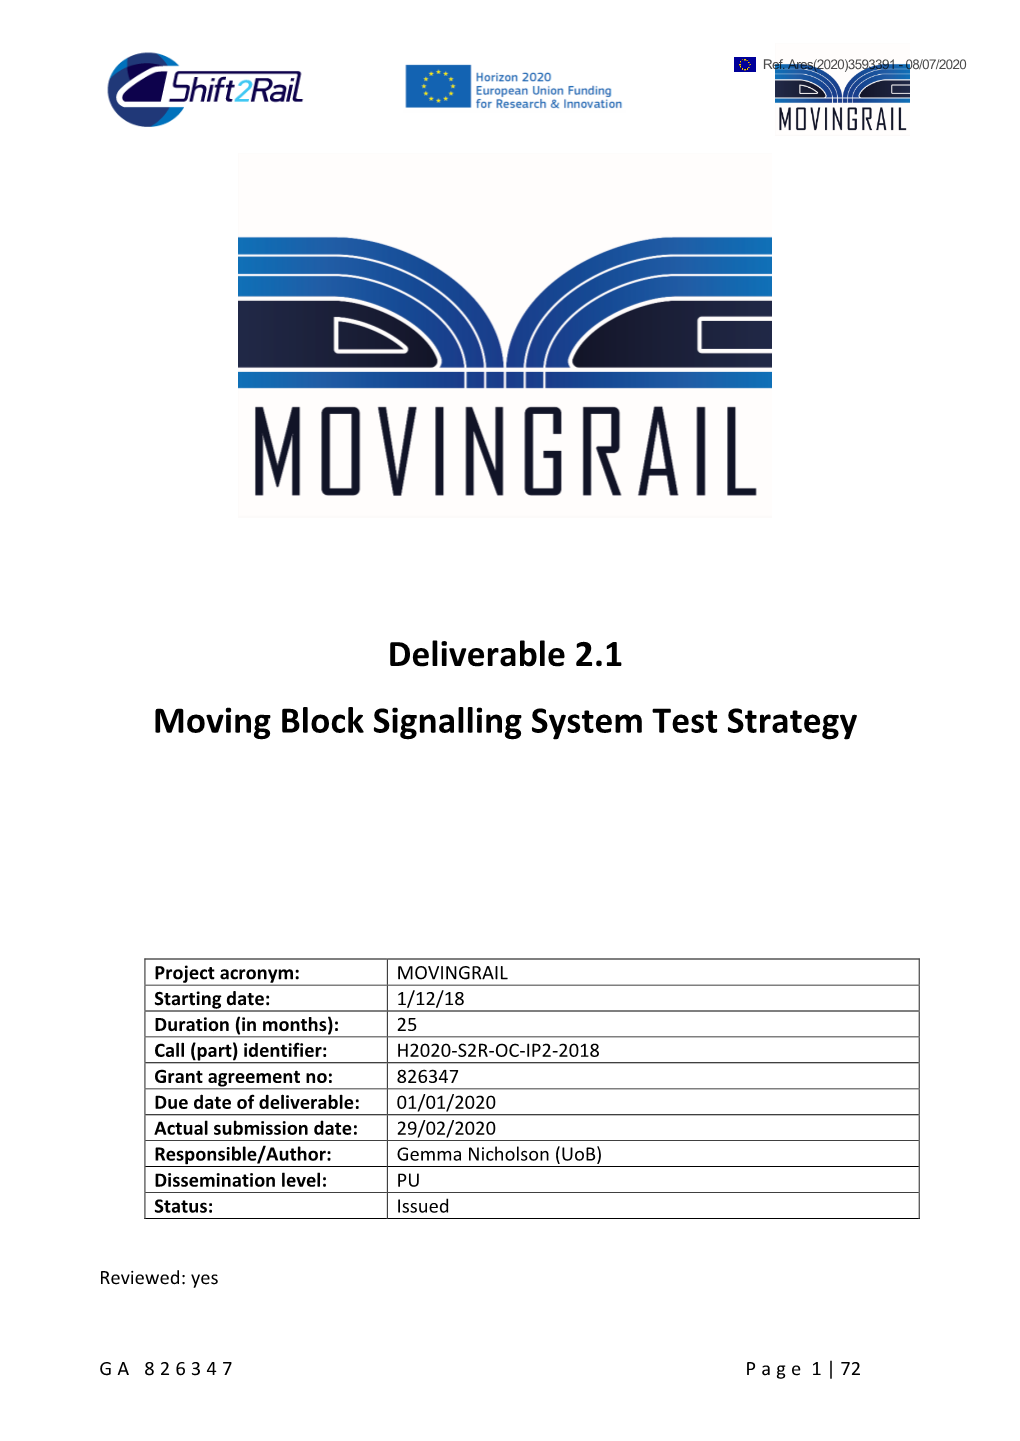 Deliverable 2.1 Moving Block Signalling System Test Strategy